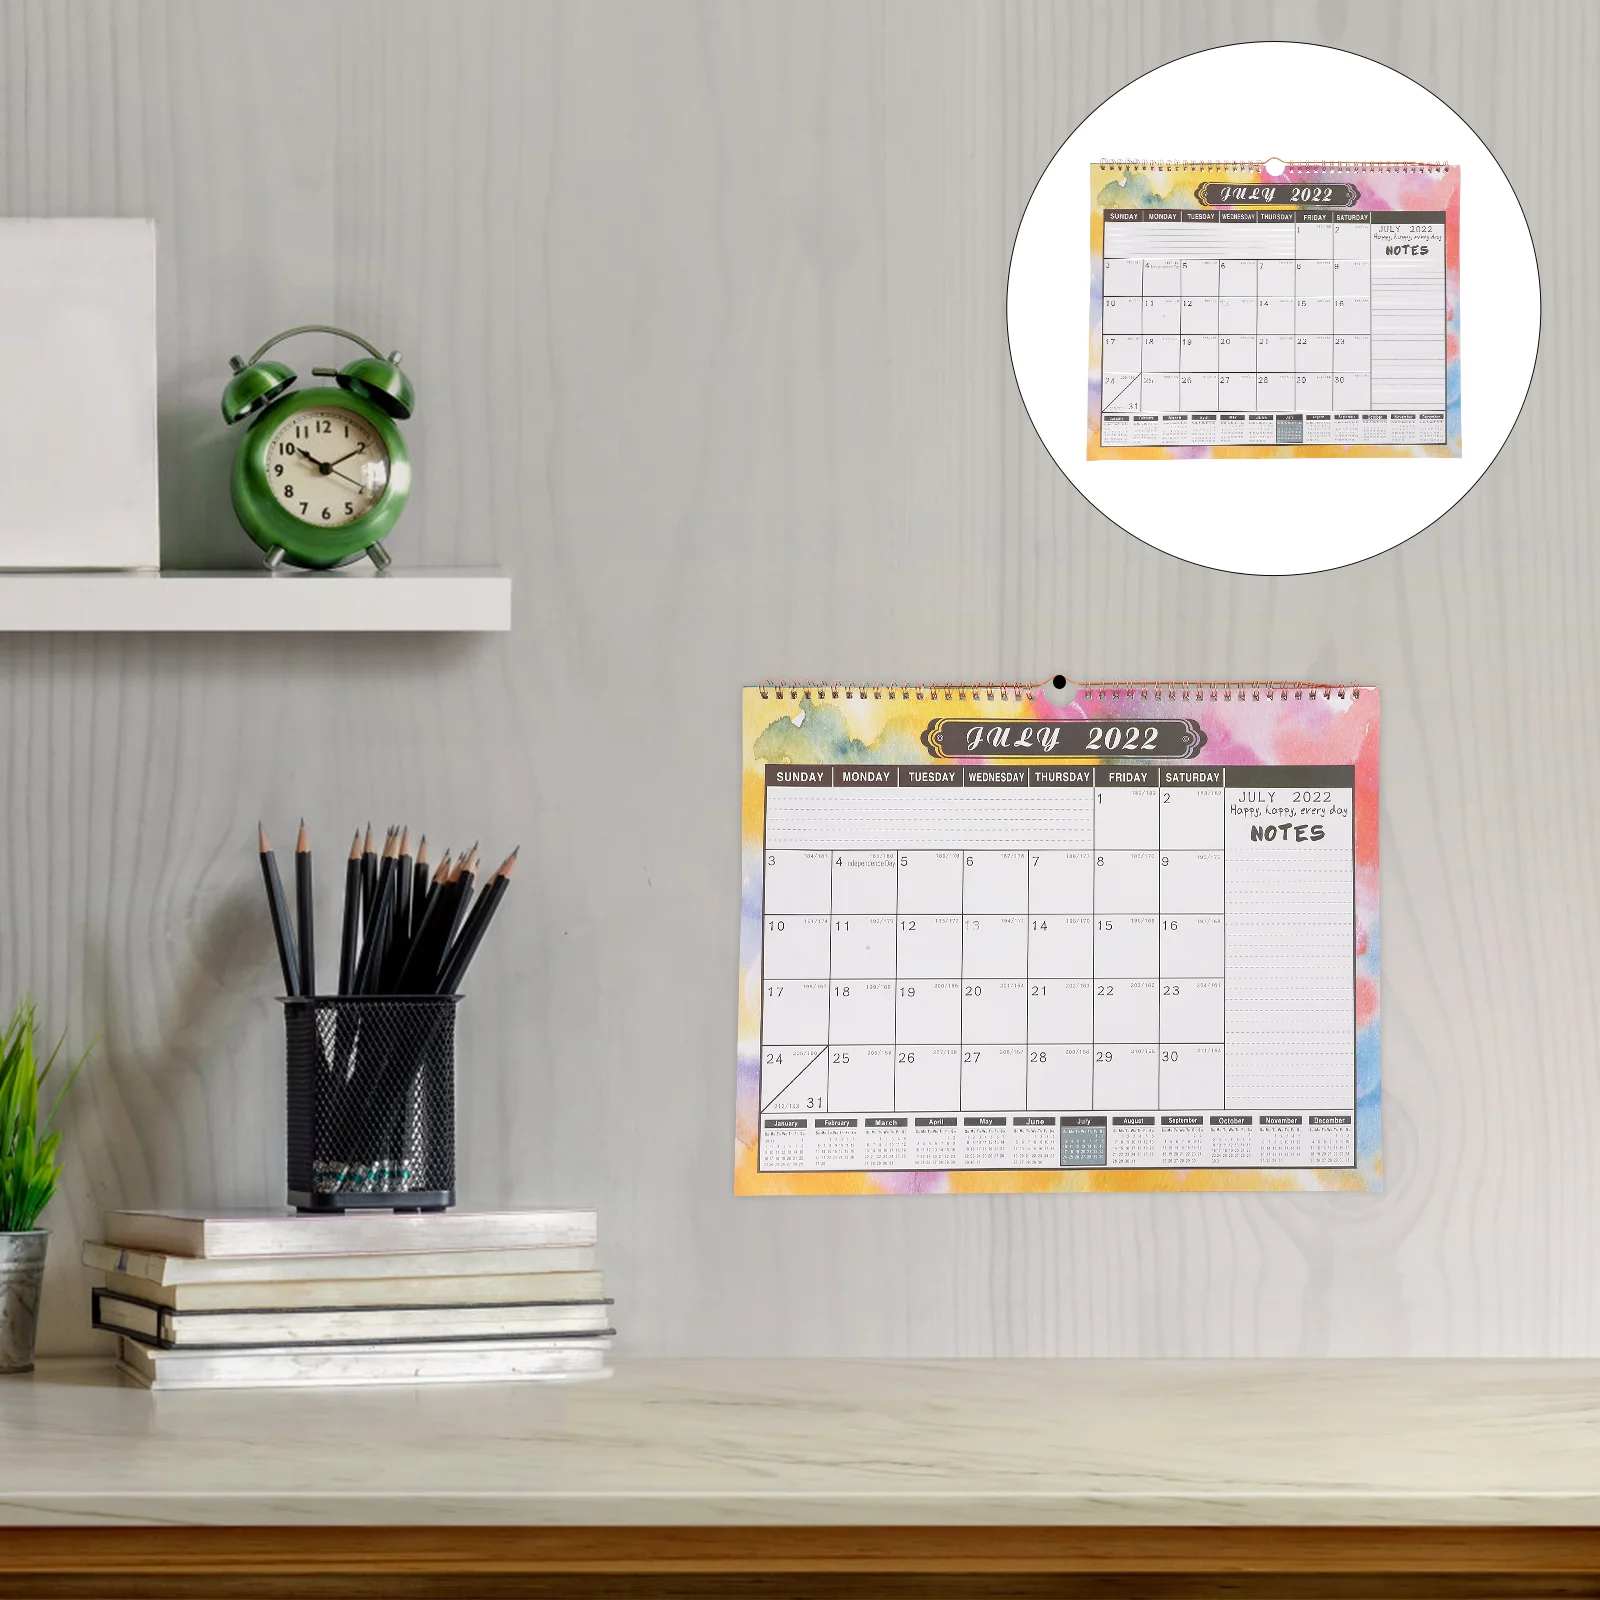 

Calendar 2023 2022 Wall Planner Book Monthly Hanging Schedule Yearly Planning Daily Year Teacher Budget Drawdown Financial Books